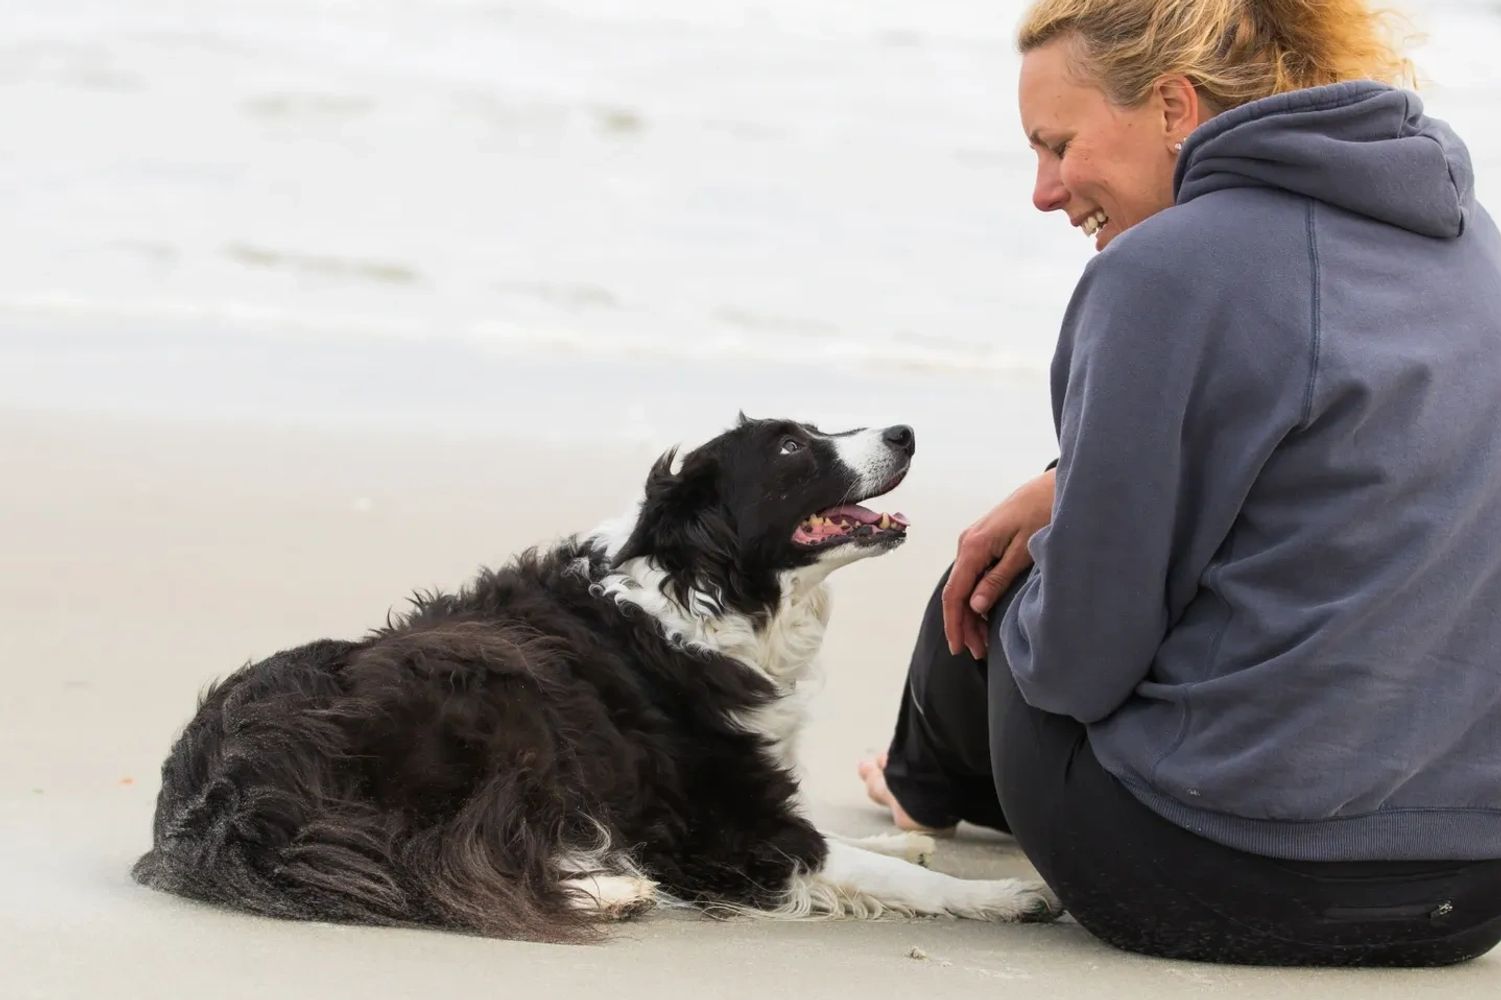 Trainer and Pepper relax at beach after agility